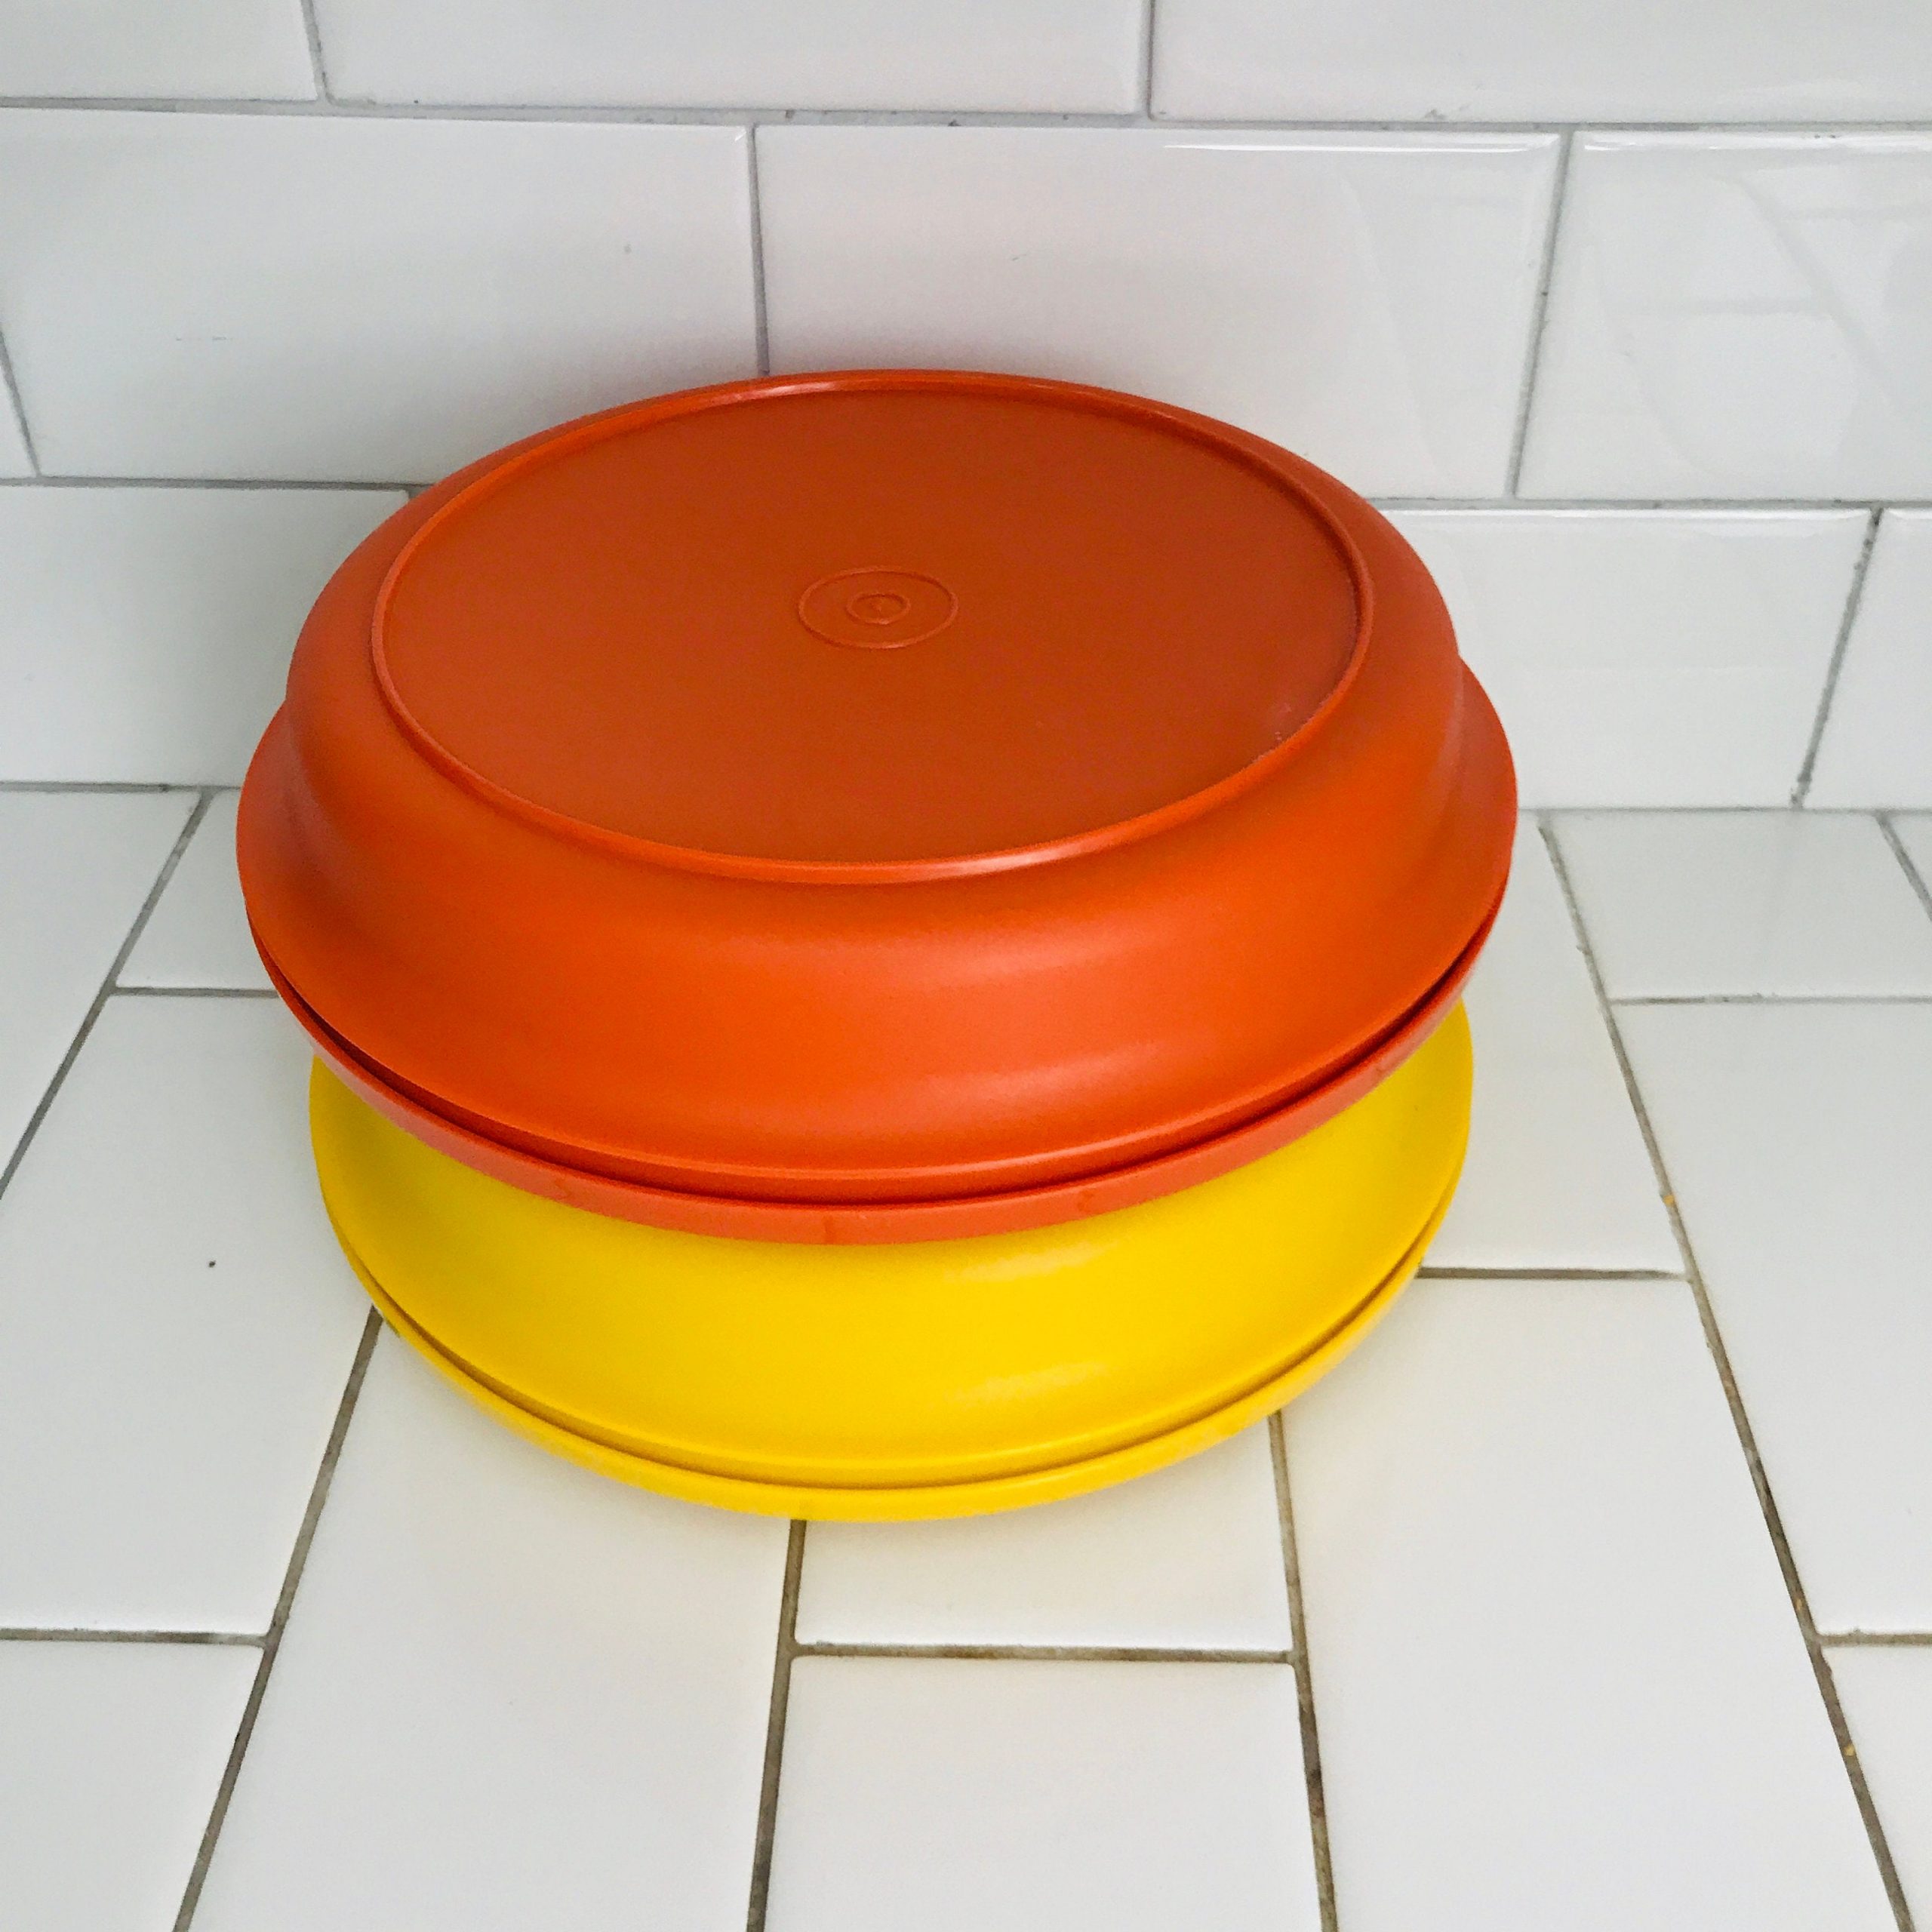 https://www.truevintageantiques.com/wp-content/uploads/2020/06/set-of-two-vintage-tupperware-seal-and-serve-bowls-vintage-harvest-colors-collectible-display-kitchen-storage-farmhouse-cottage-5eee7c2d5-scaled.jpg